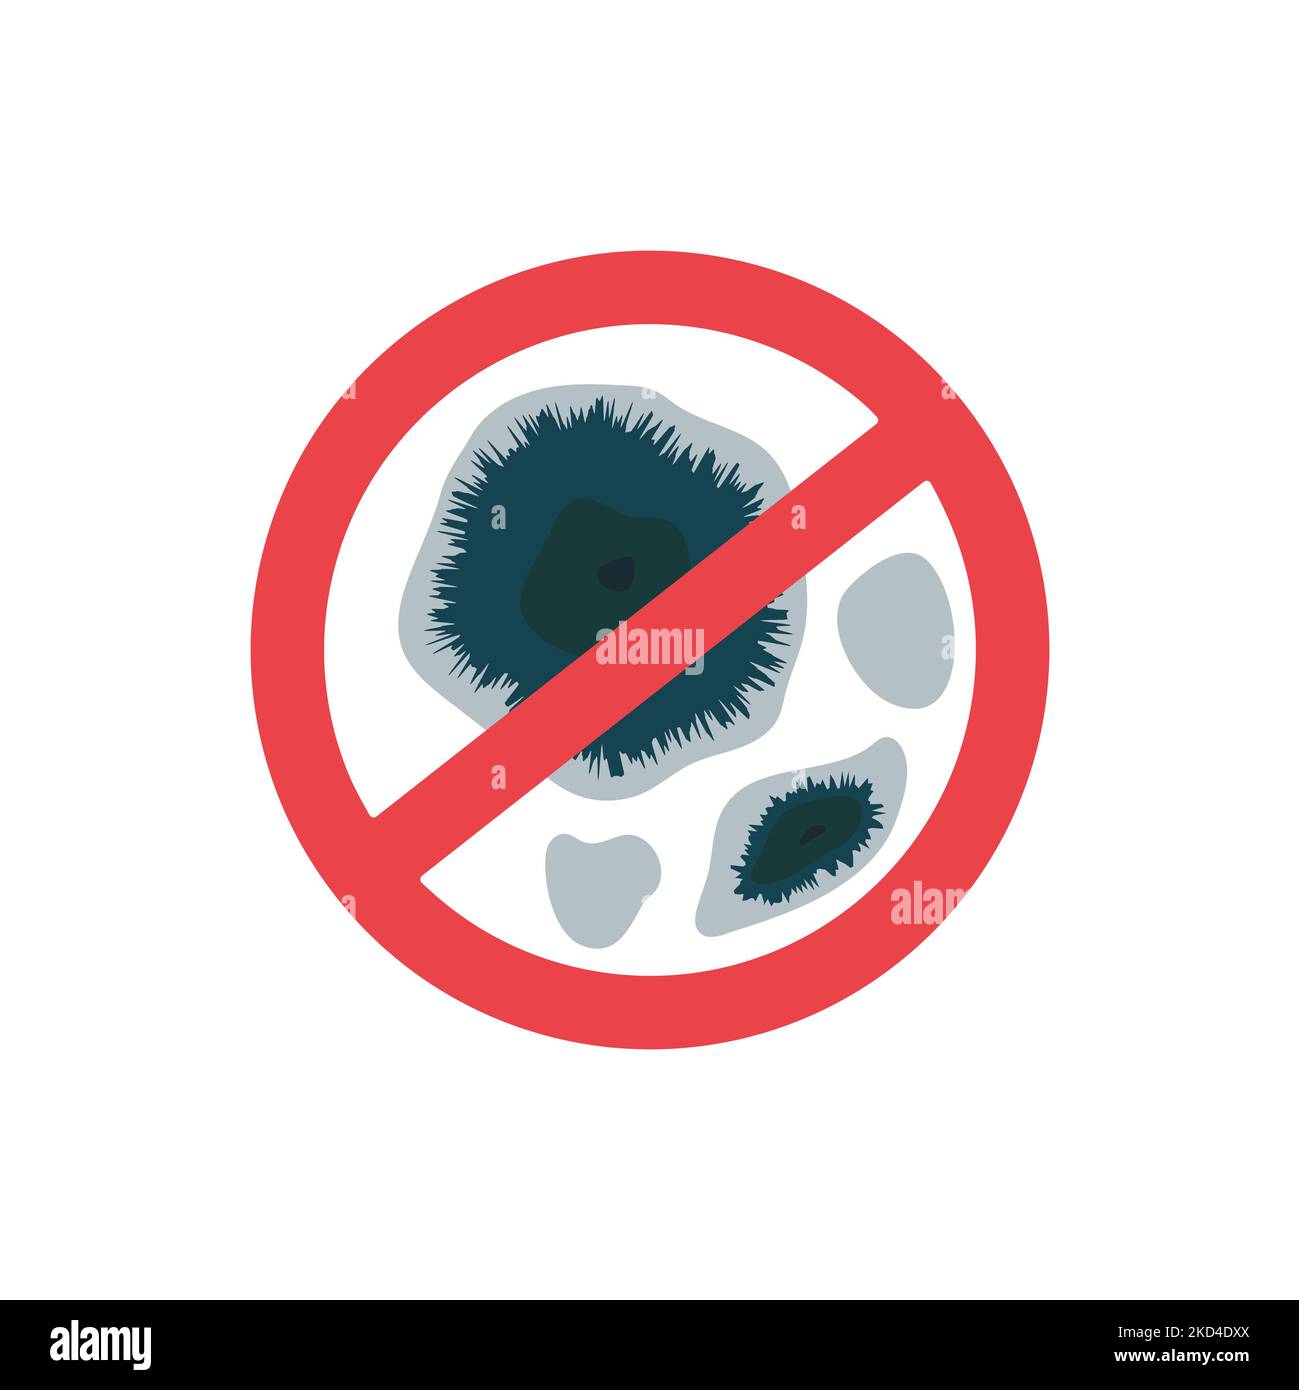 Mold stop sign, conceptual illustration Stock Photo